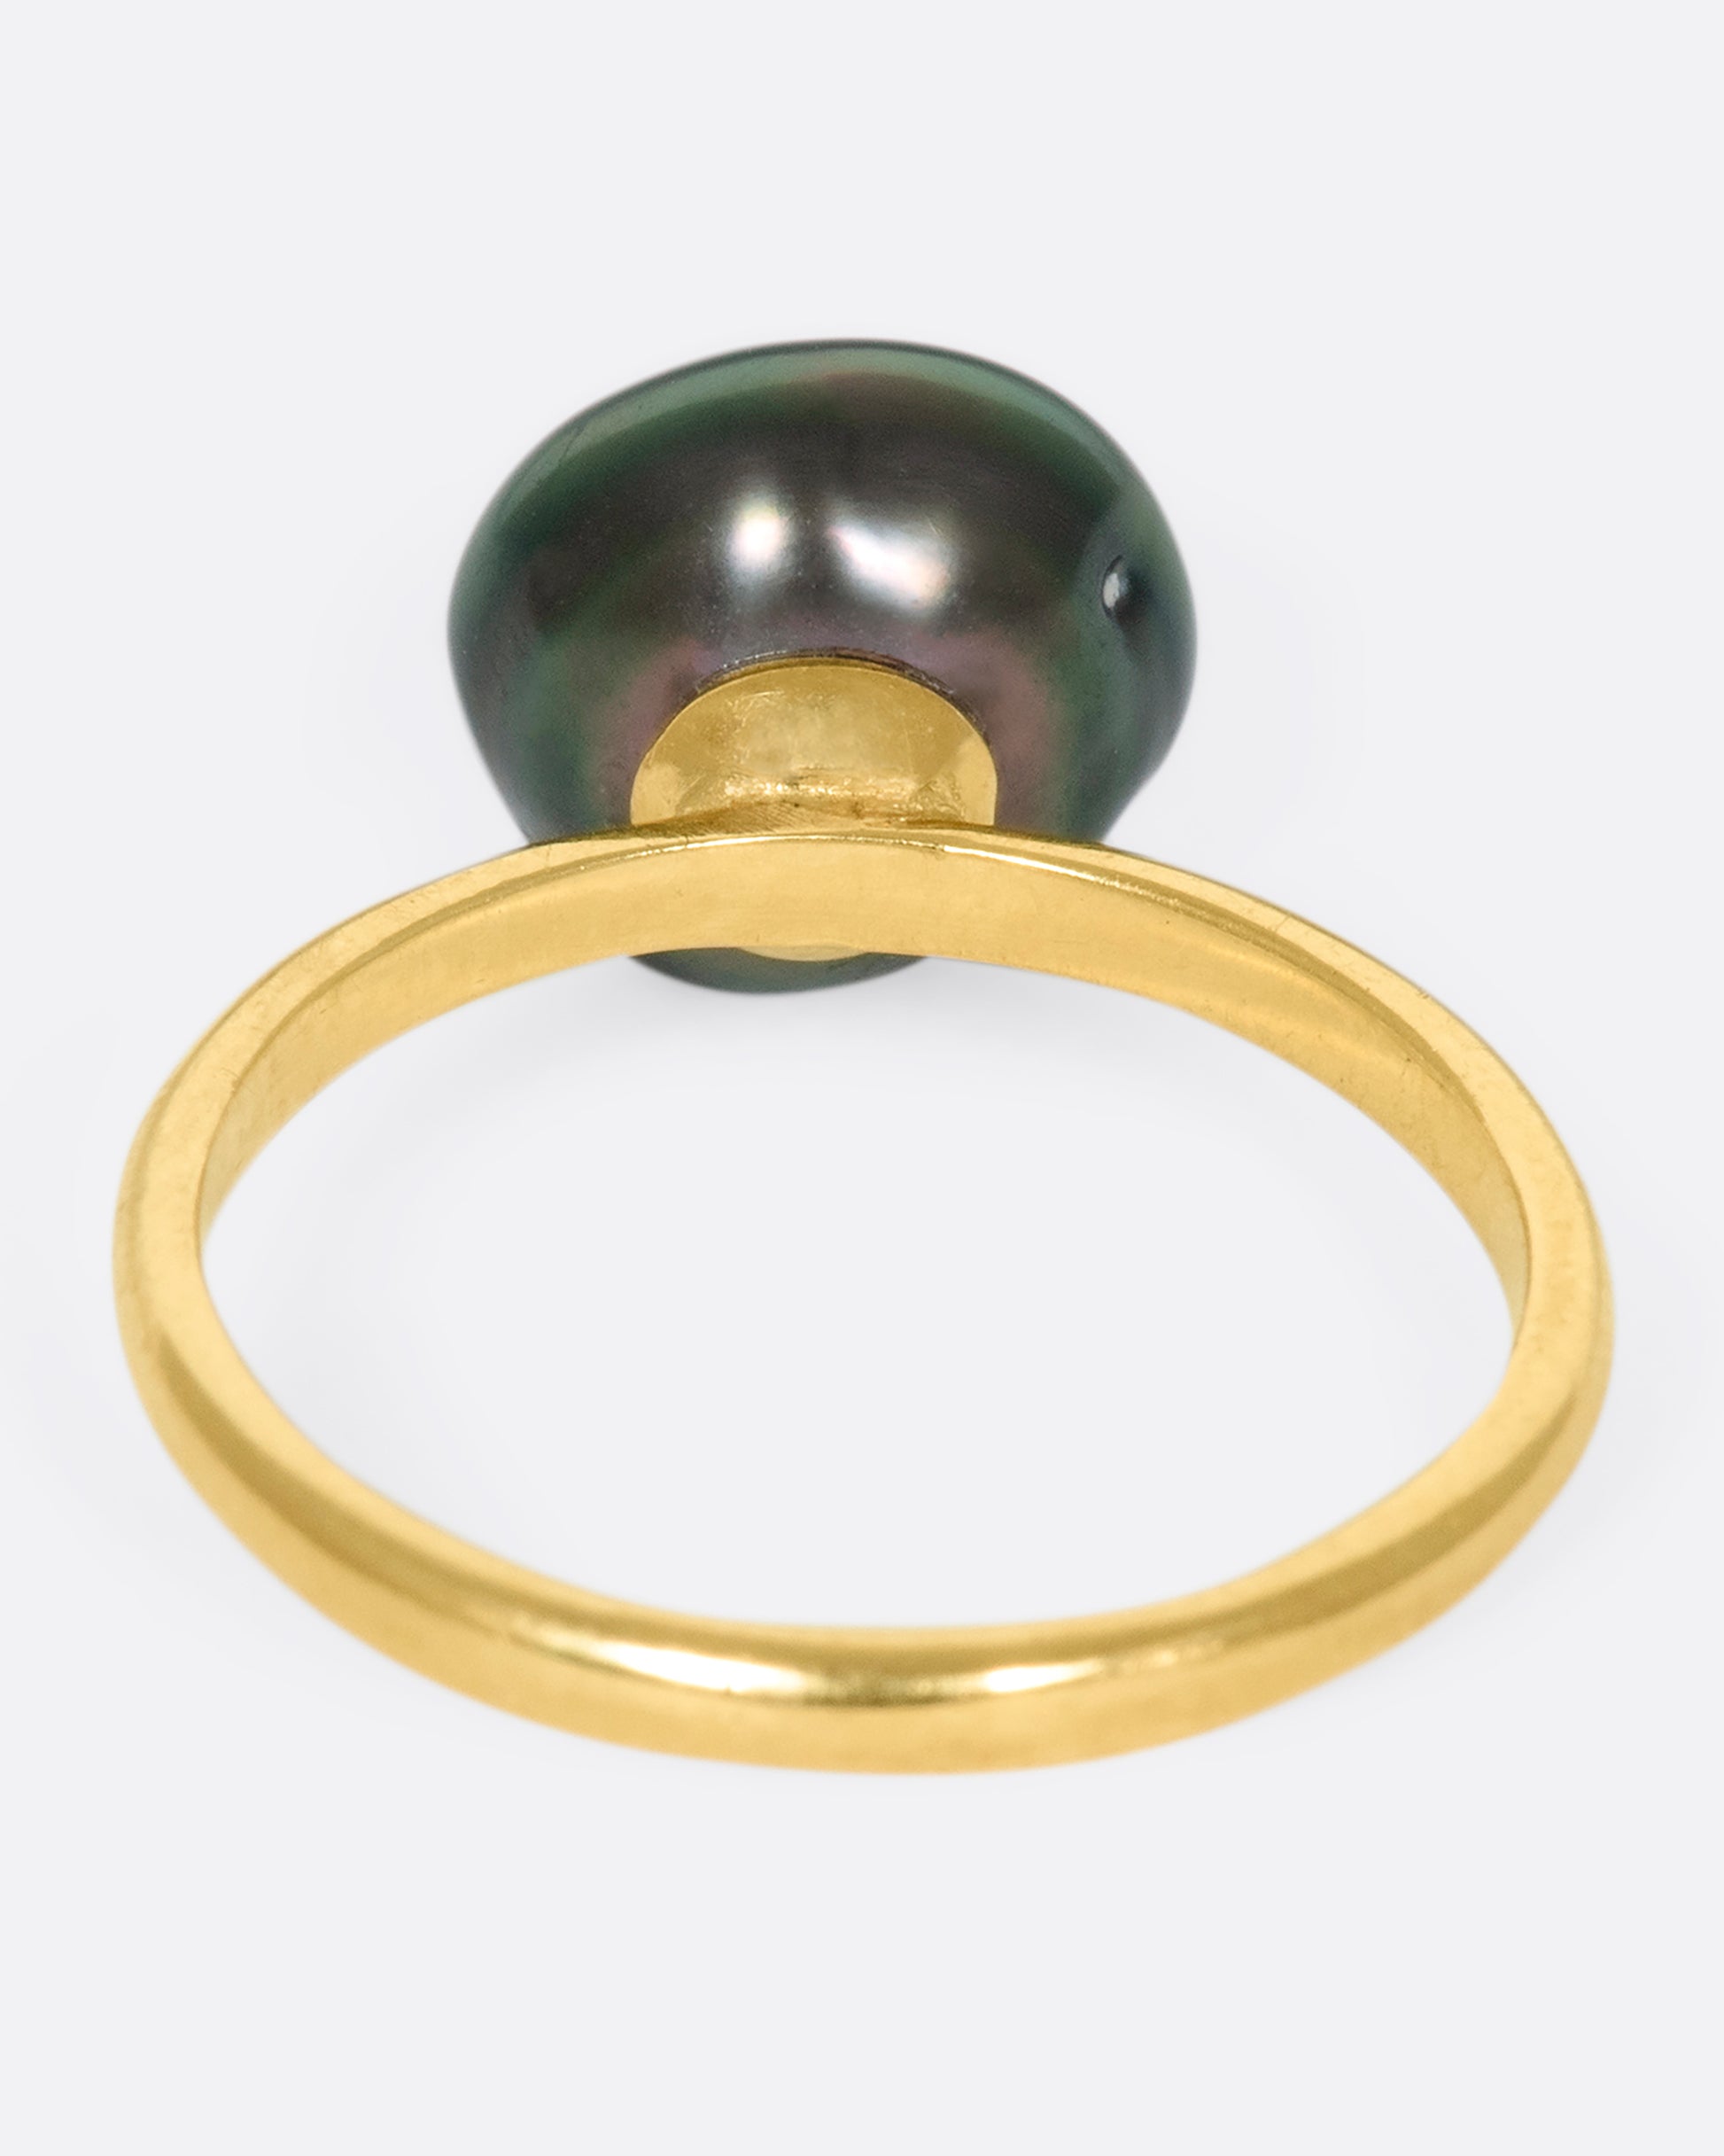 A 14k gold band with a carved Tahitian keshi pearl lined with black diamonds